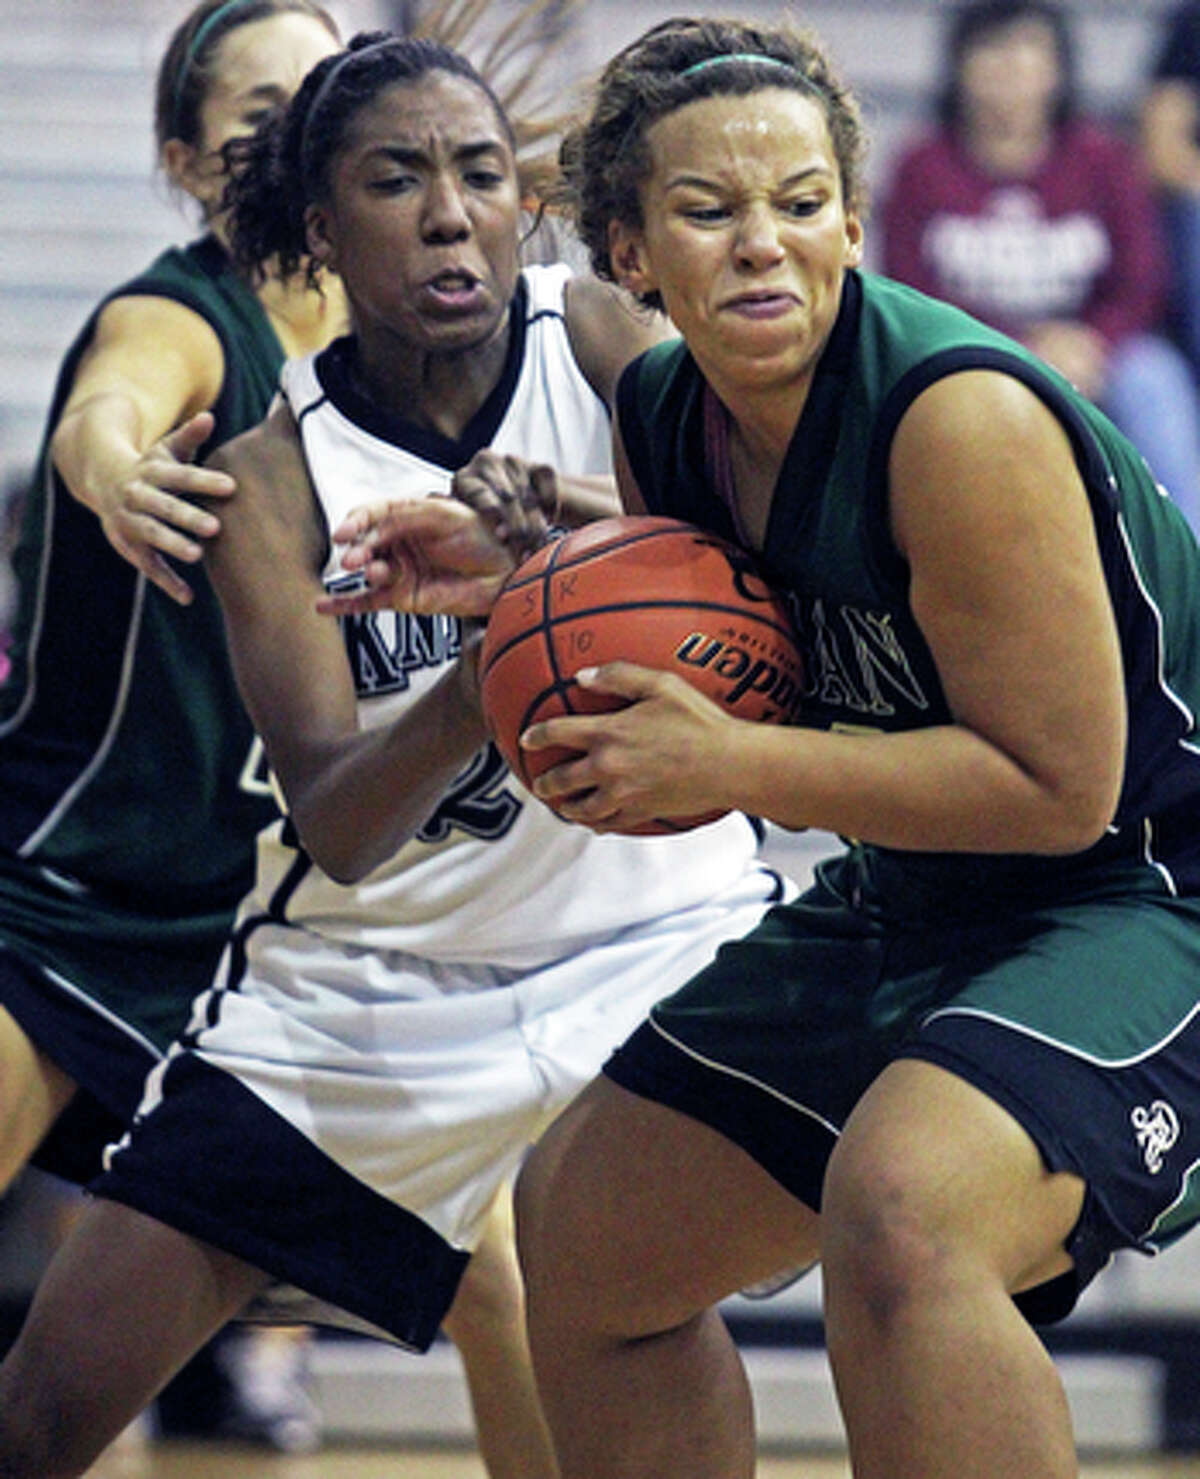 Reagan's Corrigan Tibbs muscles a defensive rebound away from the Knights' Taylor Calvert during game action in Steele's 74-54 win at Steele gym on Nov. 16, 2010.